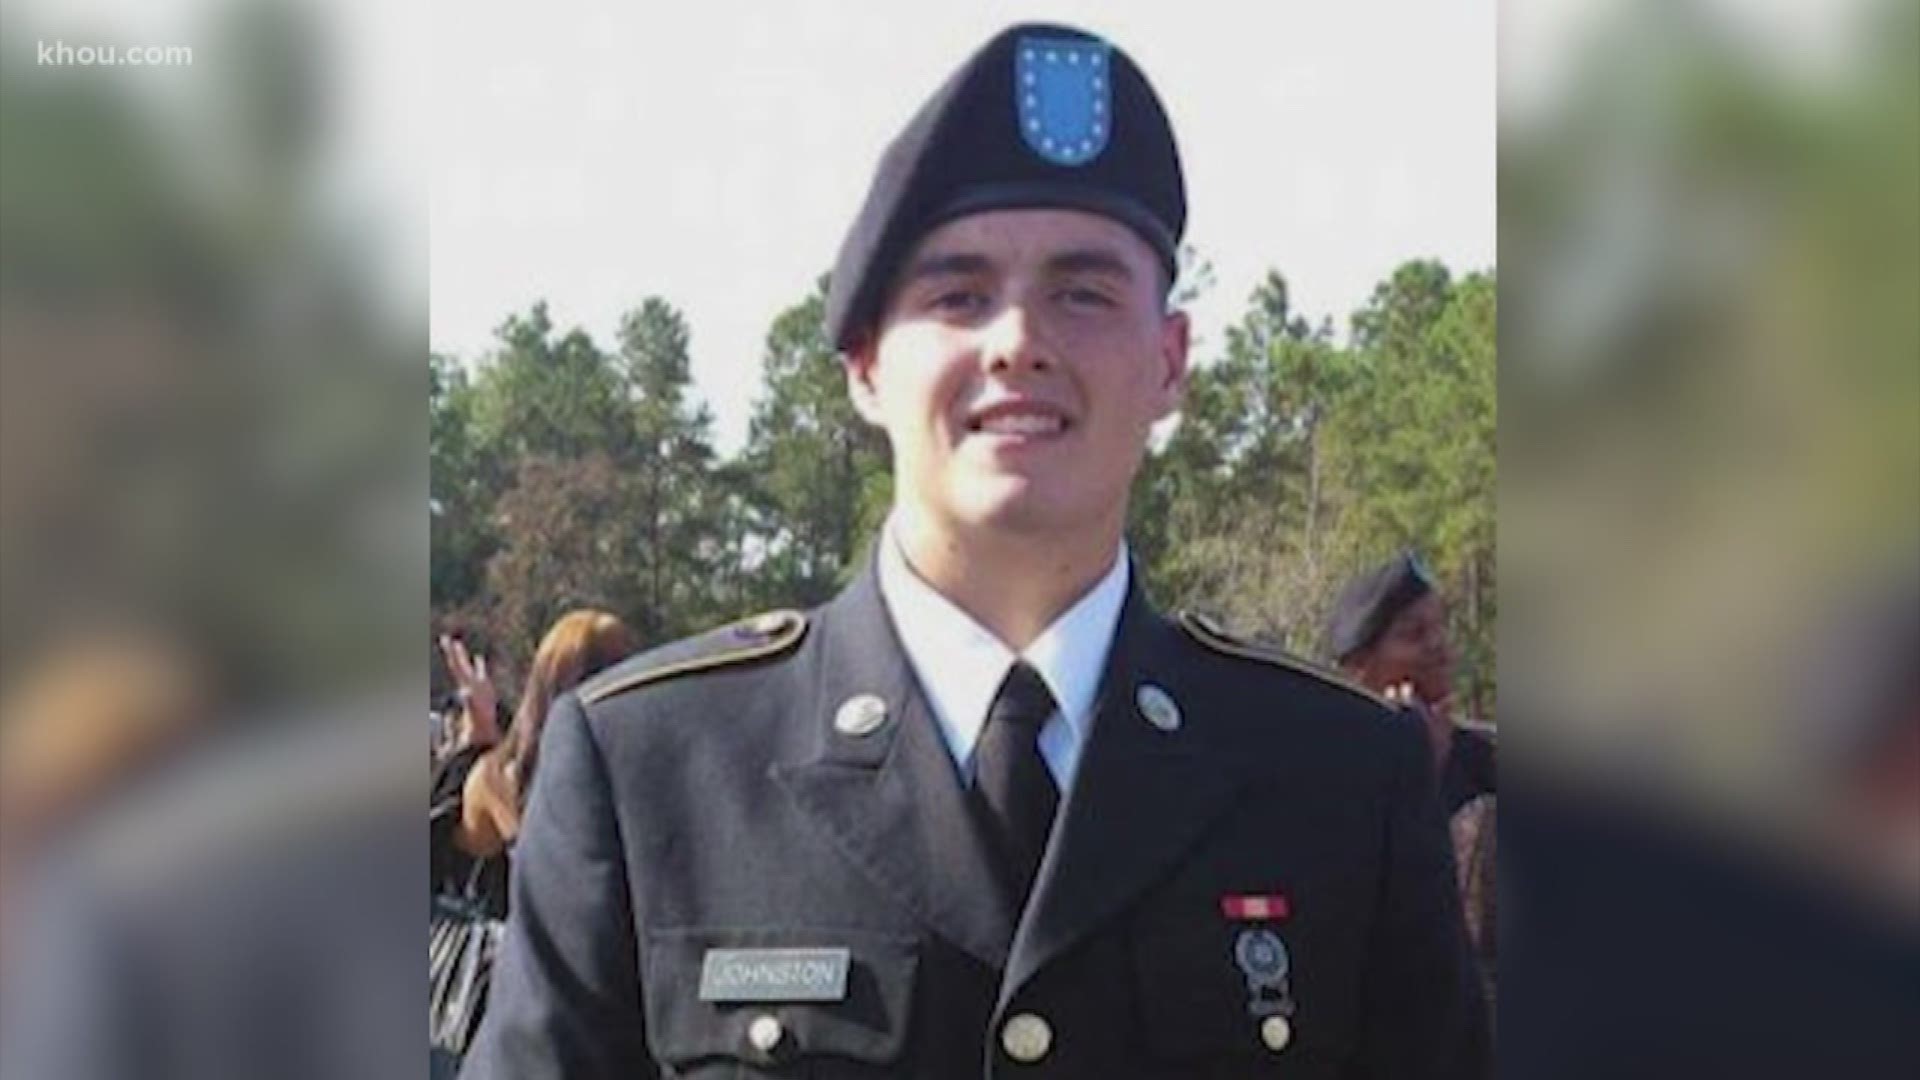 A Fort Hood soldier died in combat in Afghanistan. Twenty-four-year-old Sgt. James Johnston died from wounds sustained during combat. A grew up in the Houston area and attended Galveston Ball High School. The Department of Defense is investigating his death. Johnston leaves behind a wife, who is pregnant.